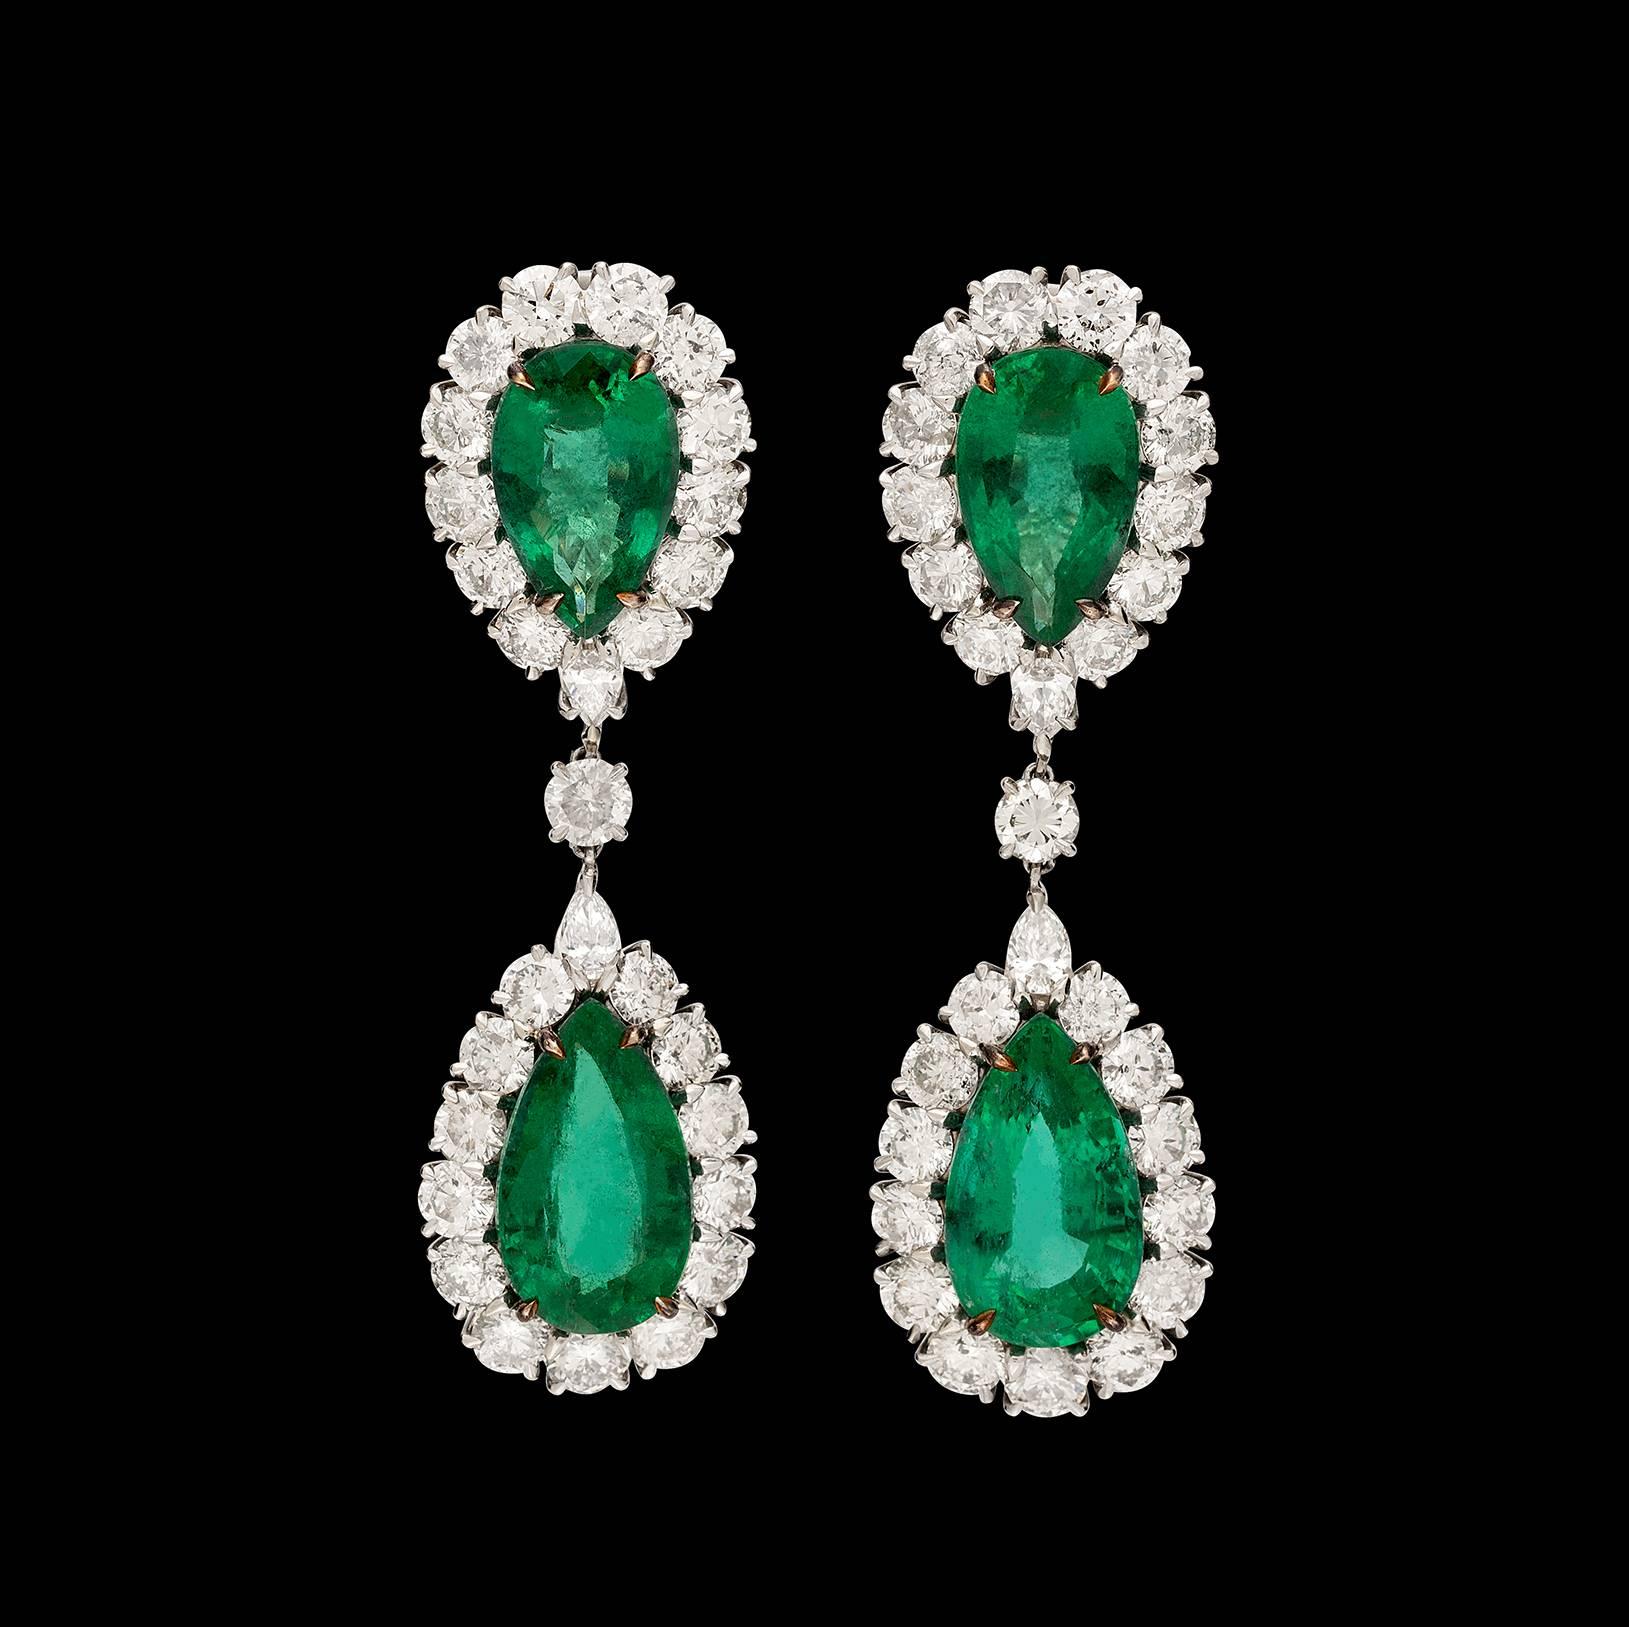 Show-stopping 18k white gold drop earrings designed with 4 pear-shaped emeralds weighing in total 24.48 carats, with round brilliant-cut and pear-shaped diamond surrounds. Total diamond weight is 11.40 carats. The earrings weigh 20.1 grams, and